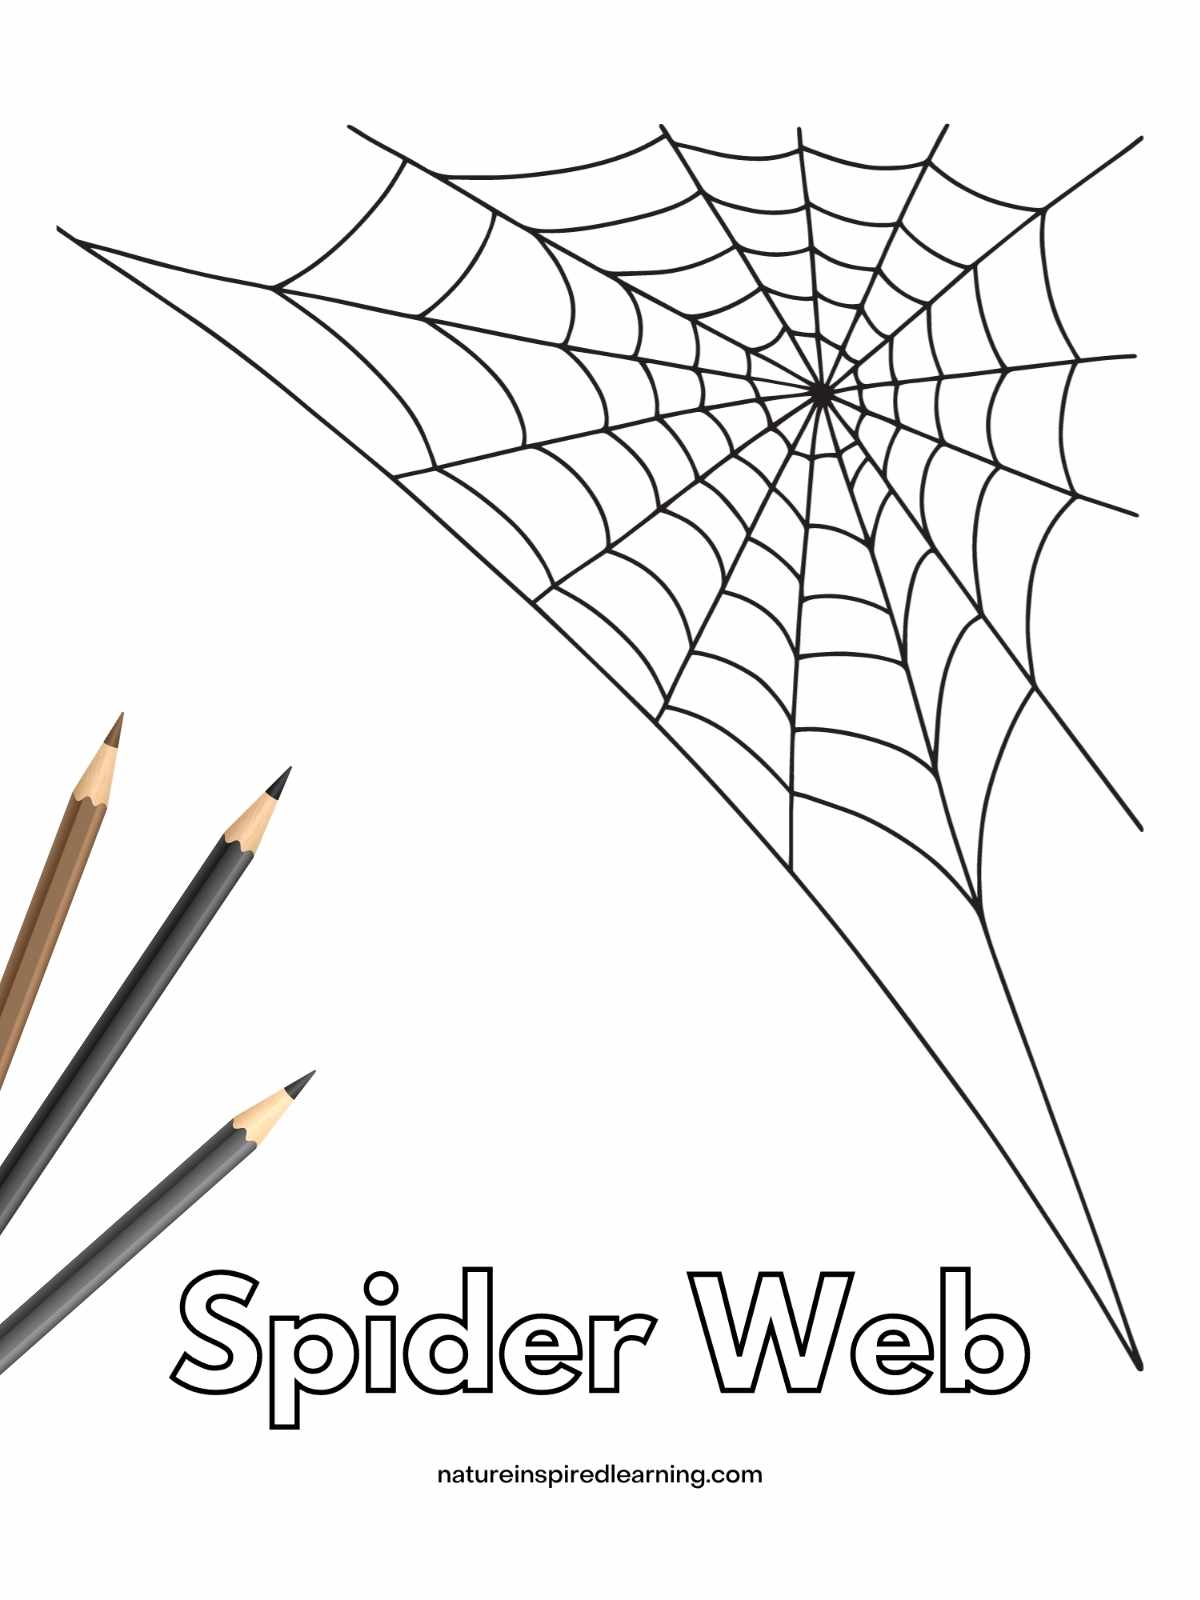 simple black and white spider web in the upper right corner with Spider Web written in bubble letters across bottom. A brown, black, and grey colored pencils bottom right on top of printable